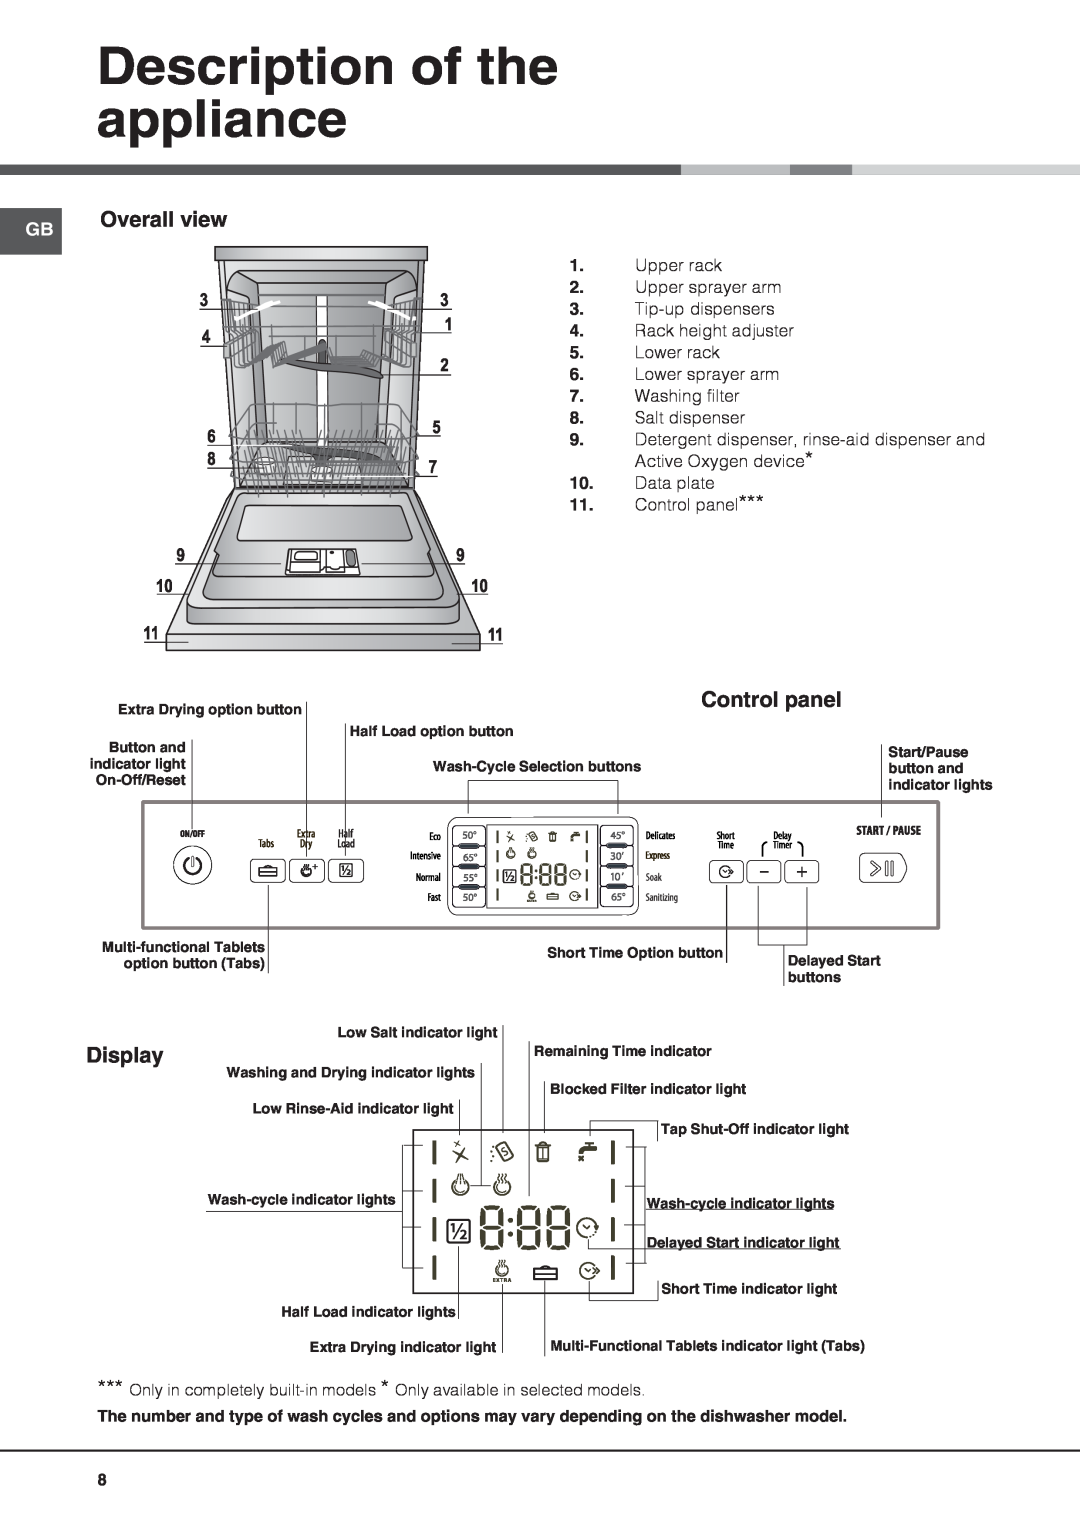 Hotpoint FDYF 11011 manual Description of the appliance, Overall view, Control panel, Display 